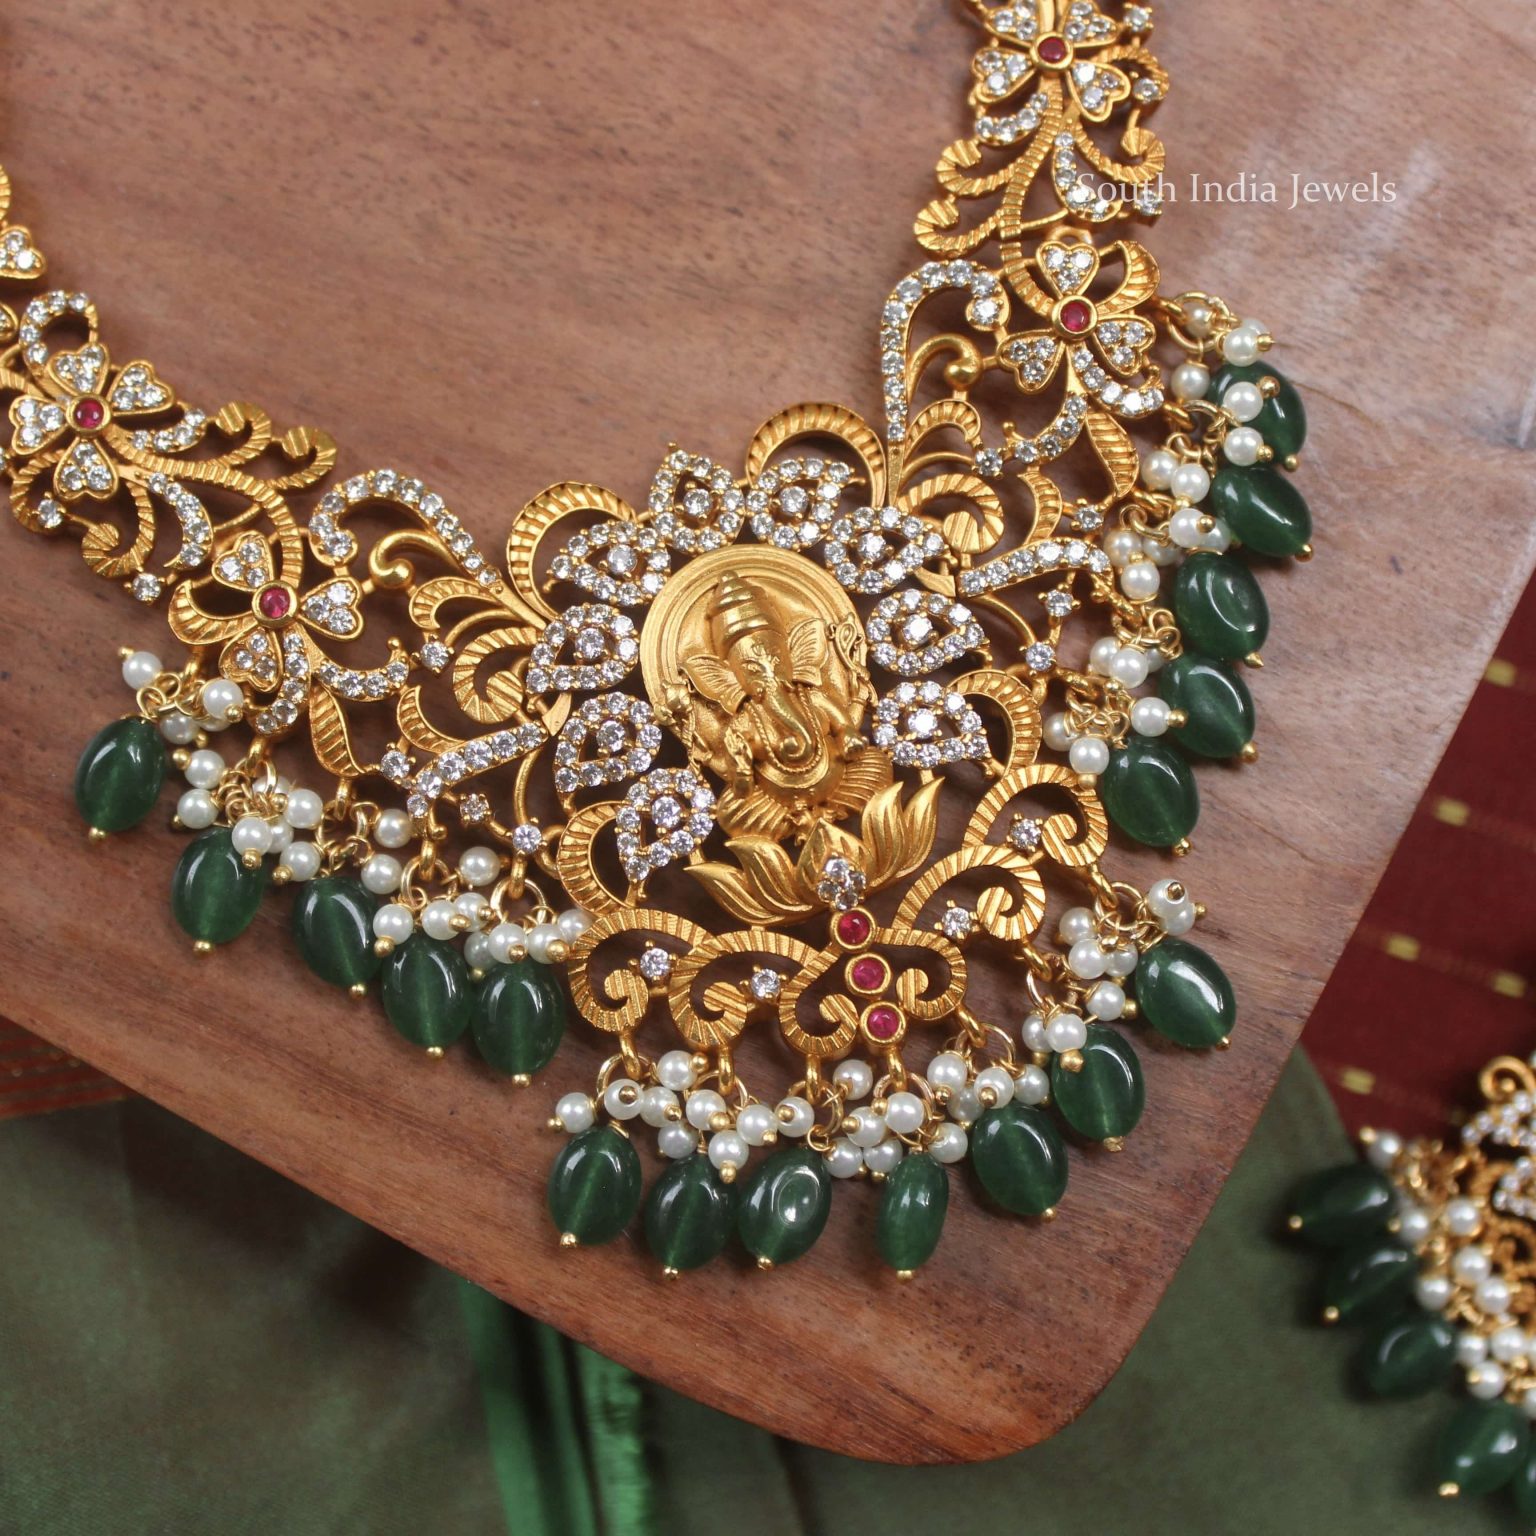 Traditional Emerald Beads Ganesha Necklace - South India Jewels